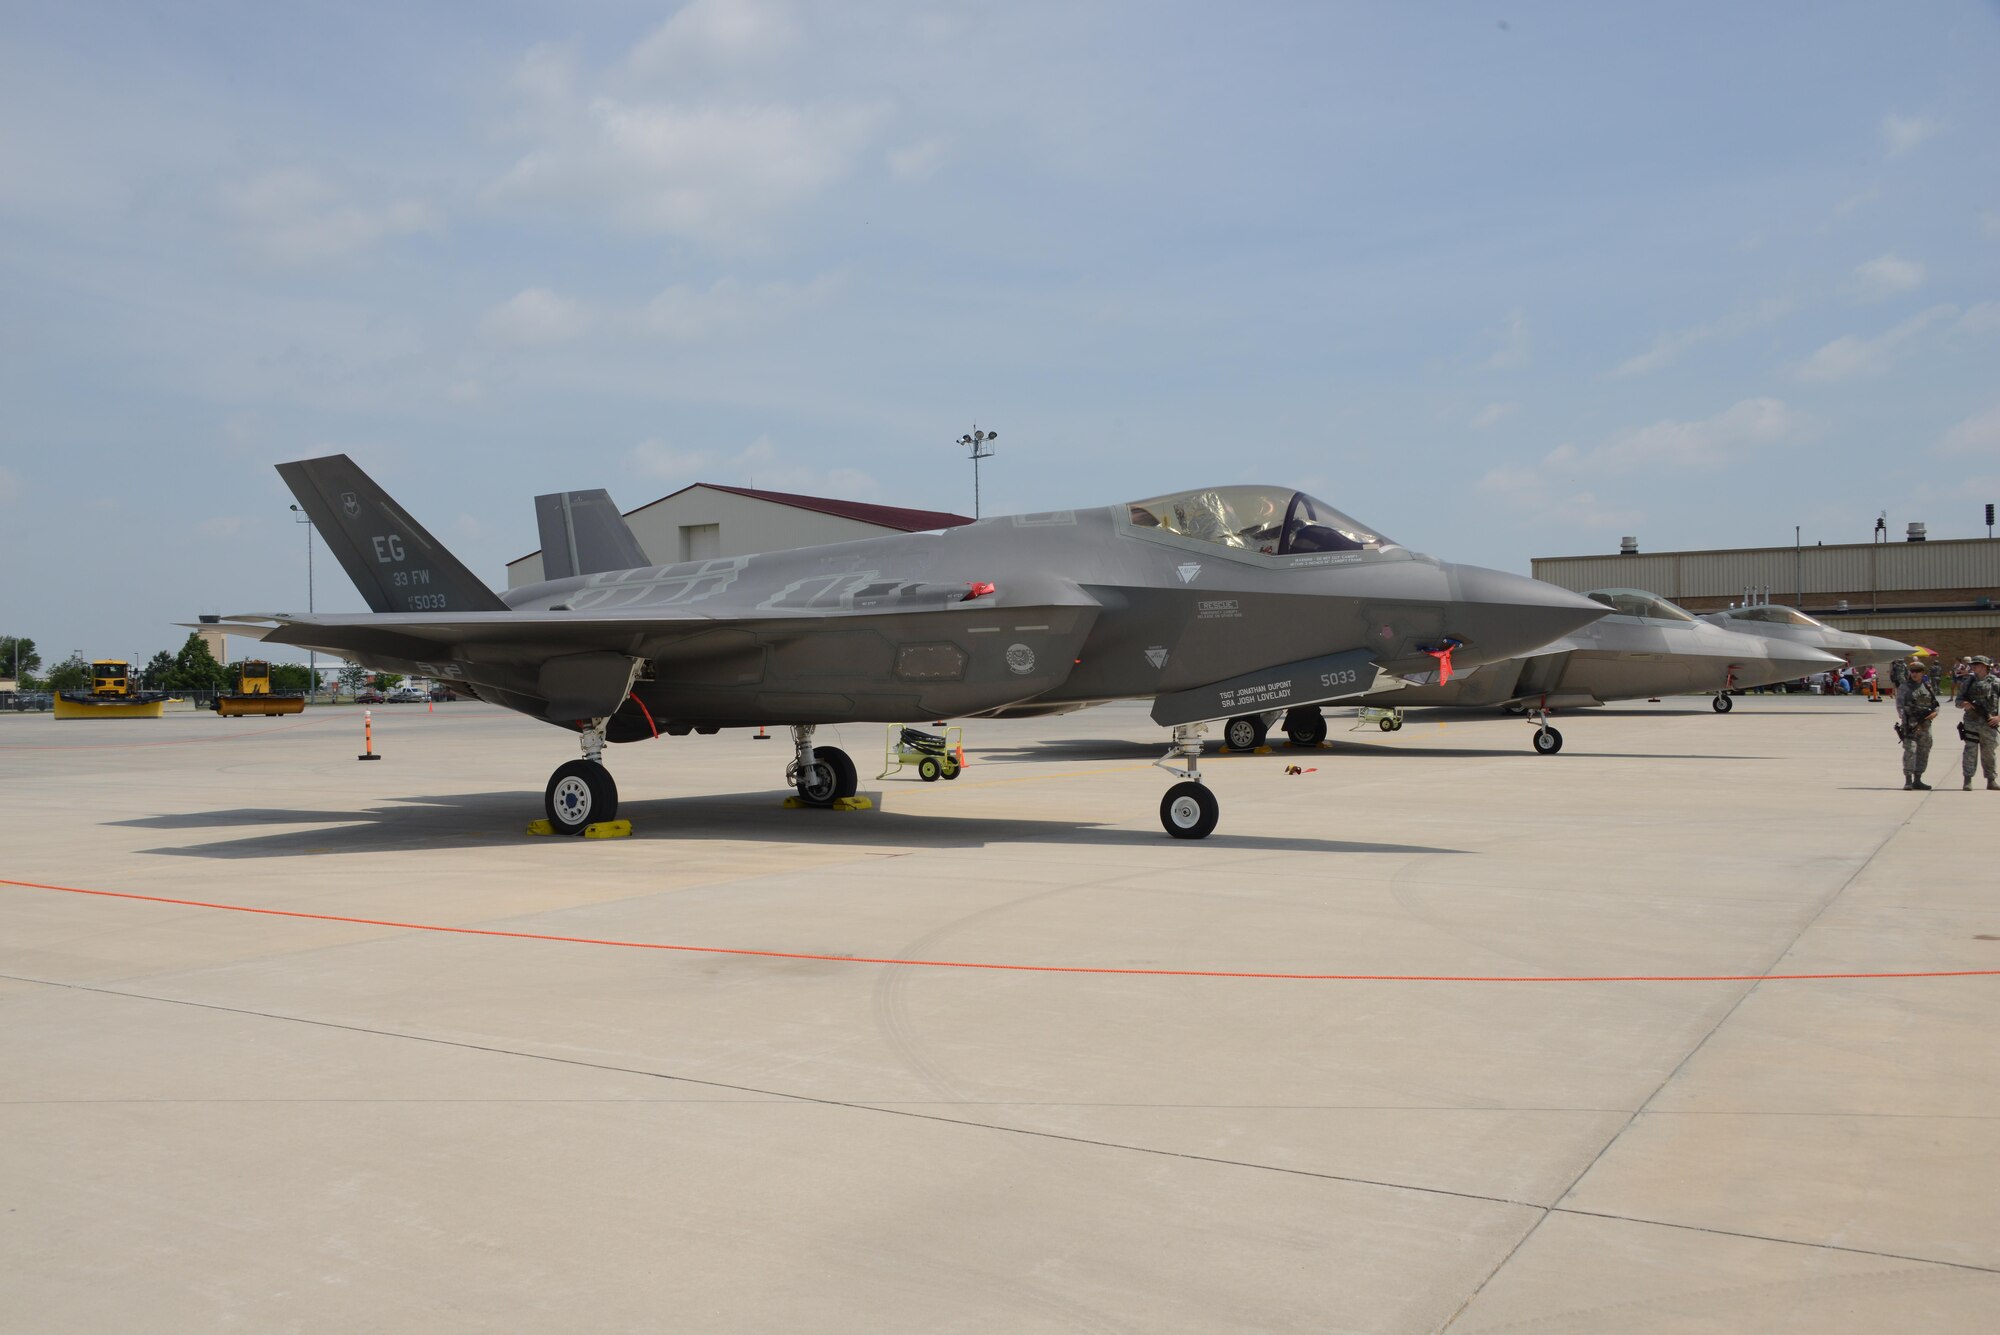 A U.S. Air Force F-35 Lighting II assigned to the 33rd Fighter Wing Eglin Air Force Base, on the ramp at the Iowa Air National Guard’s 185th Air Refueling Wing in Sioux City, Iowa on June 10, 2017. The F-35 is on display during an open house event hosted by the Iowa Air National Guard.
U.S. Air National Guard photo by Master Sgt. Vincent De Groot 185th ARW Wing PA